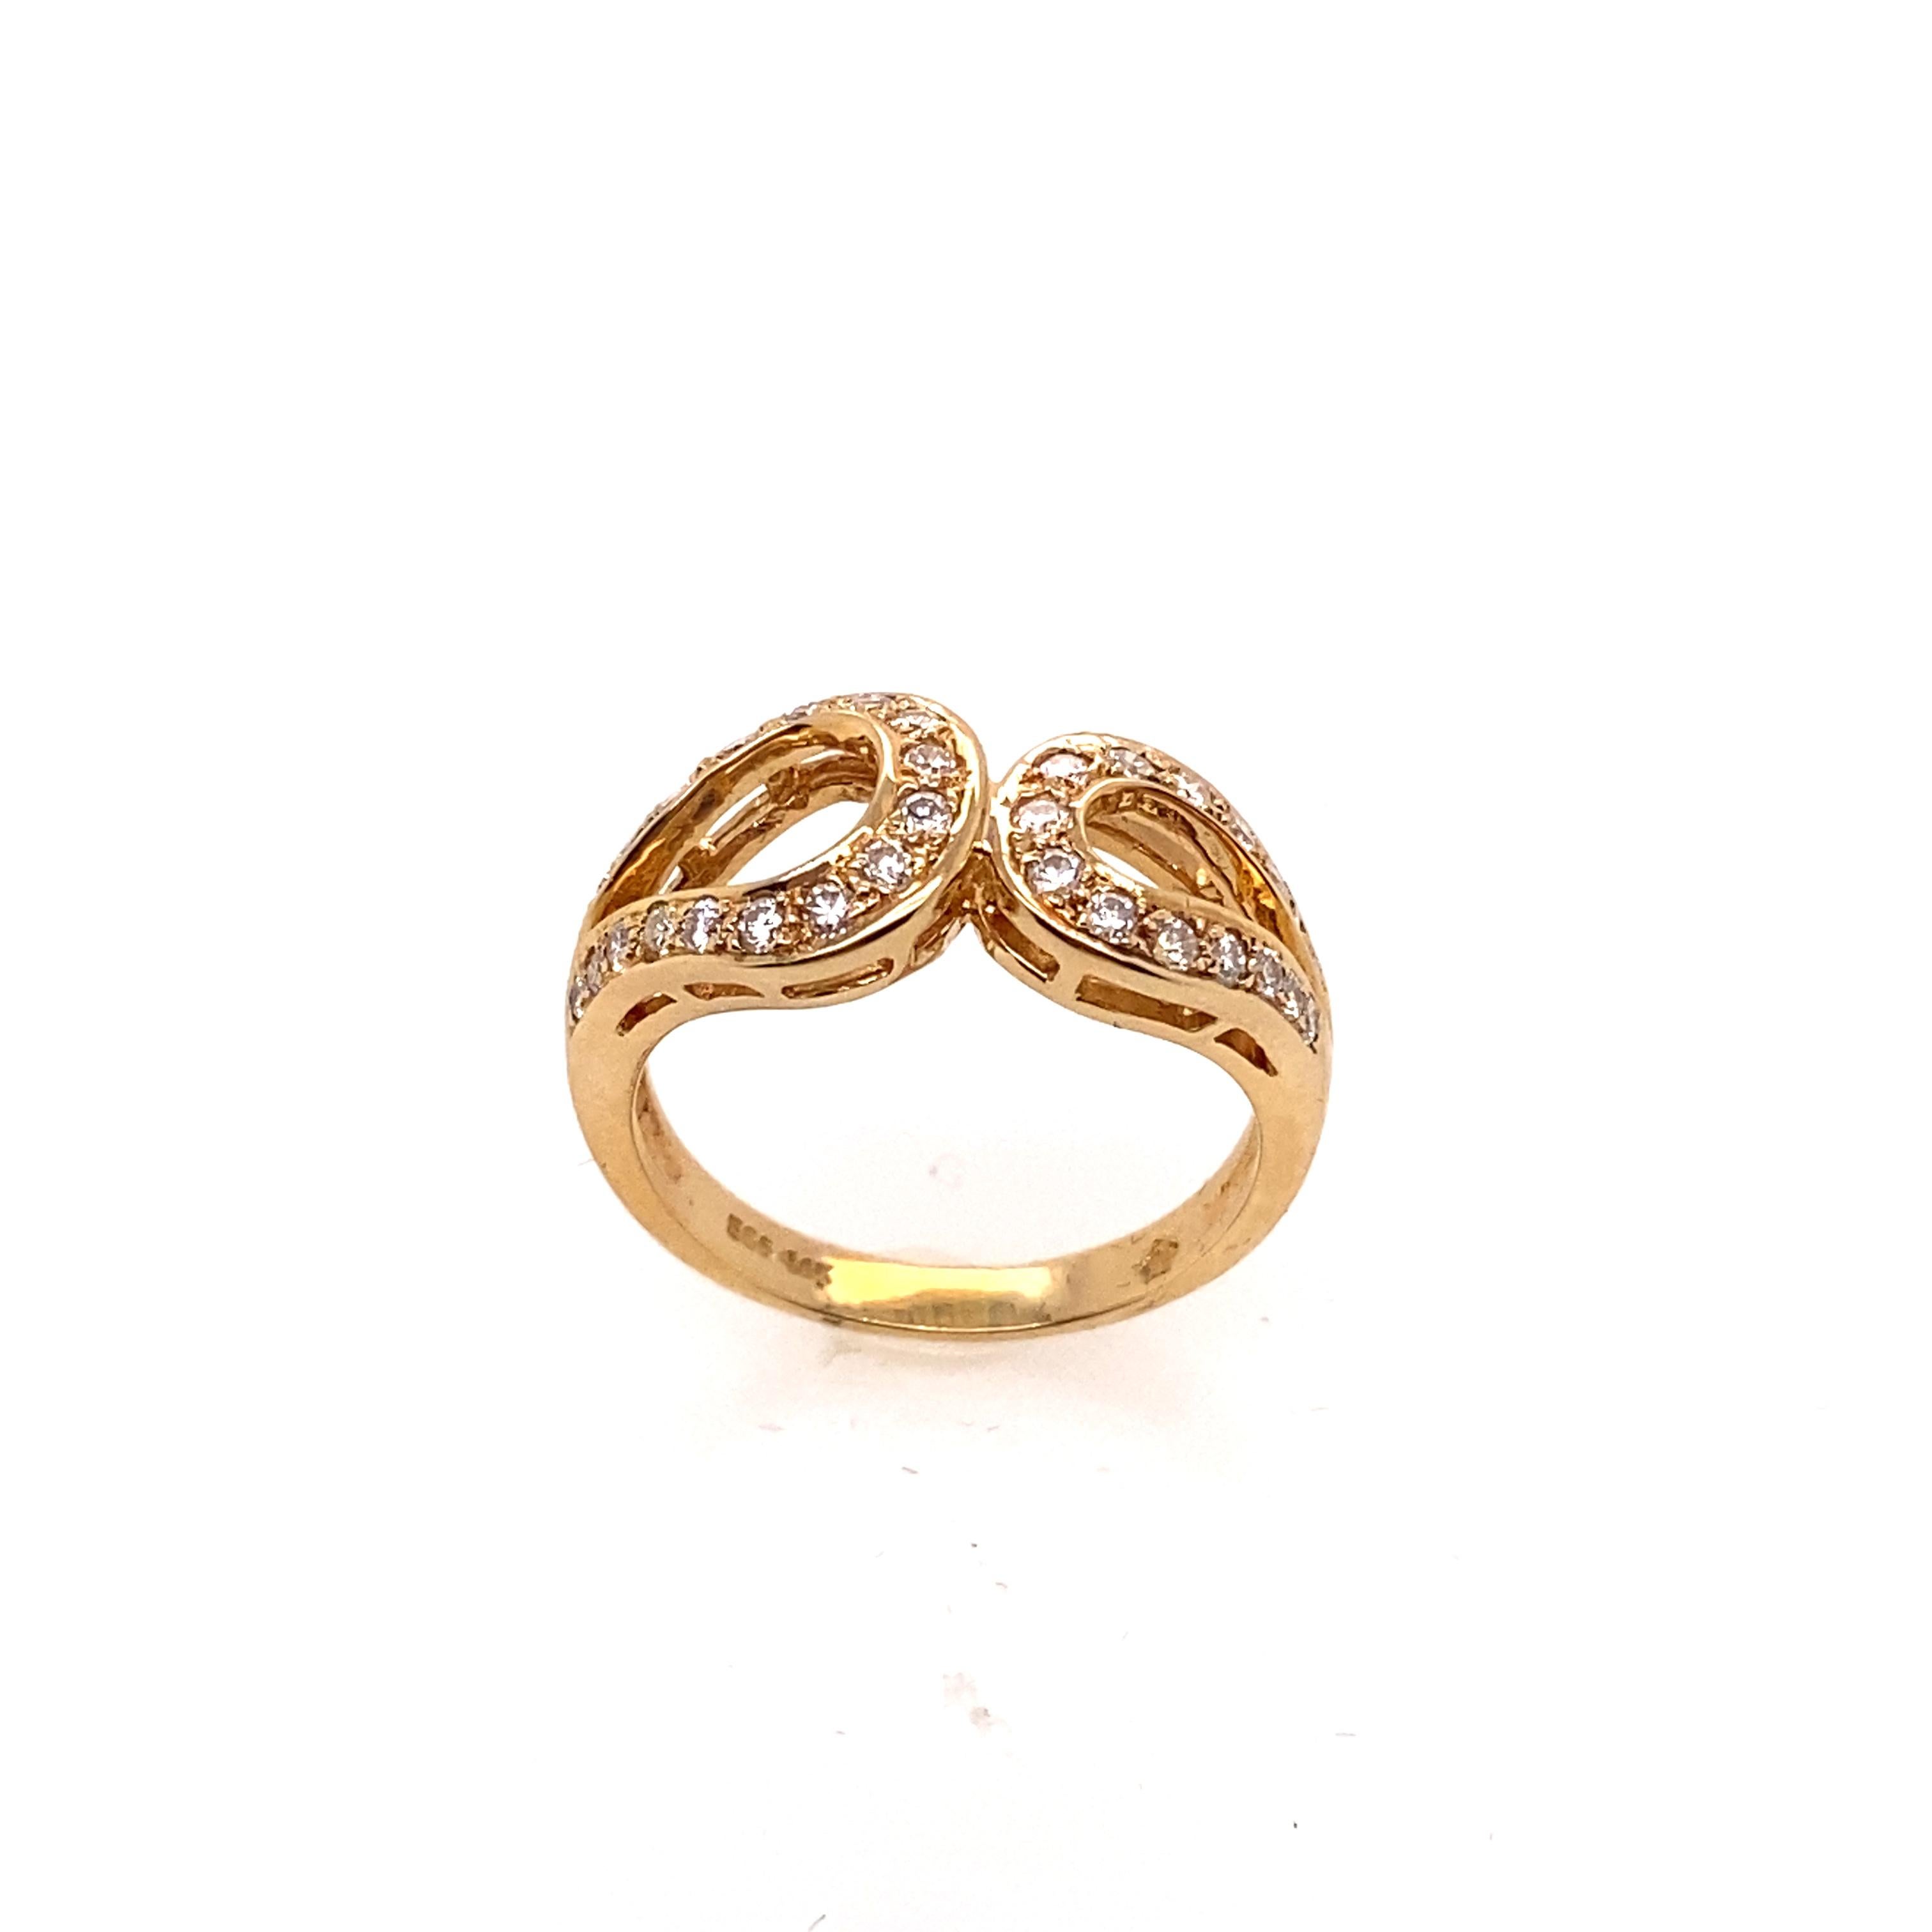 The thirty-three brilliant round diamonds set in the 14K yellow gold ring featured by a infinity design. This ring features a very classic look and can be worn as a daily-wear.

Diamonds Weight: 0.50 carat
Diamonds Shape : Brilliant Round
Diamonds